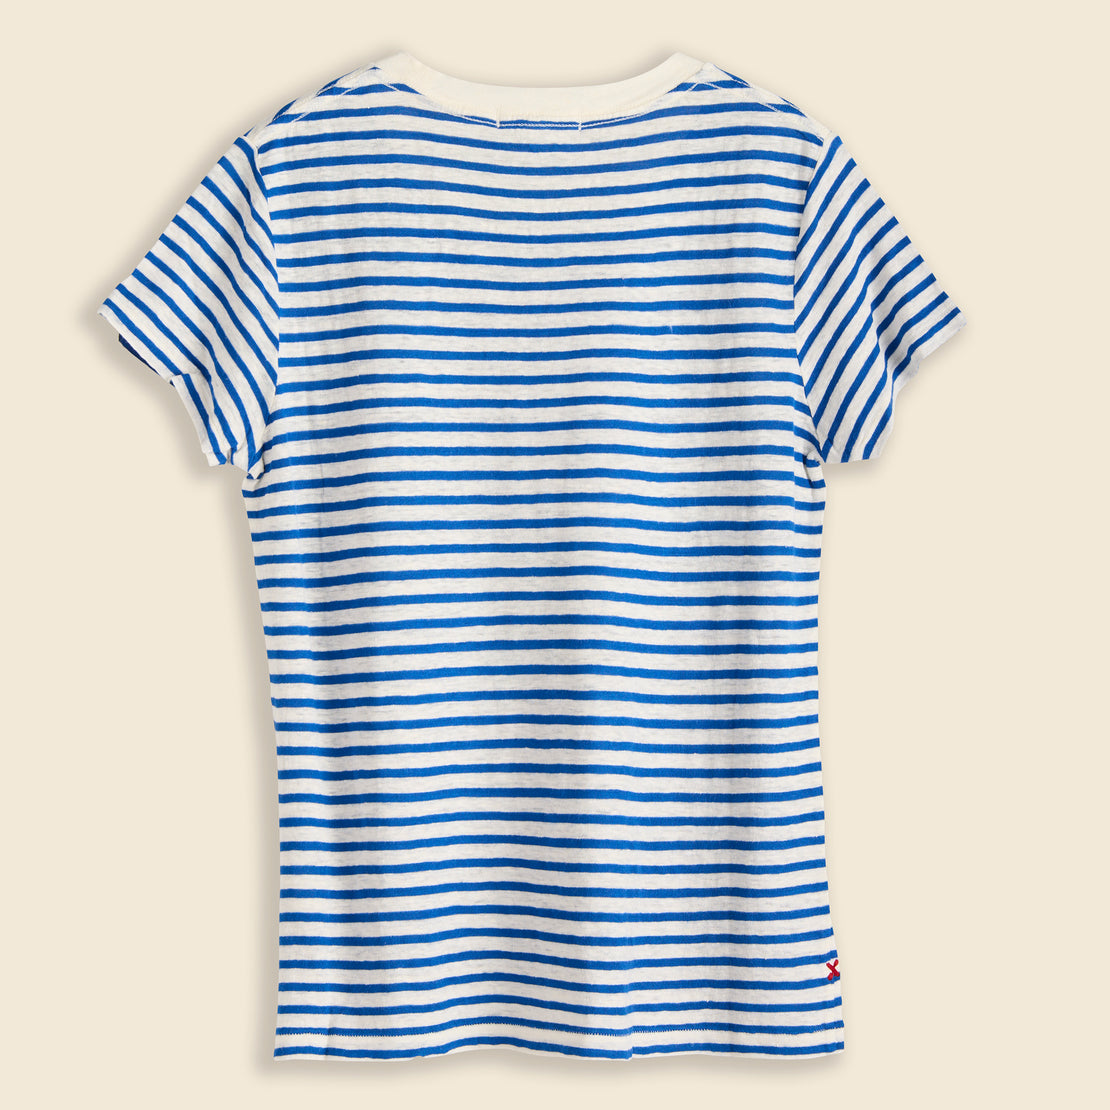 Prospect Linen Tee in Stripe - Blue/White Stripe - Alex Mill - STAG Provisions - W - Tops - S/S Tee